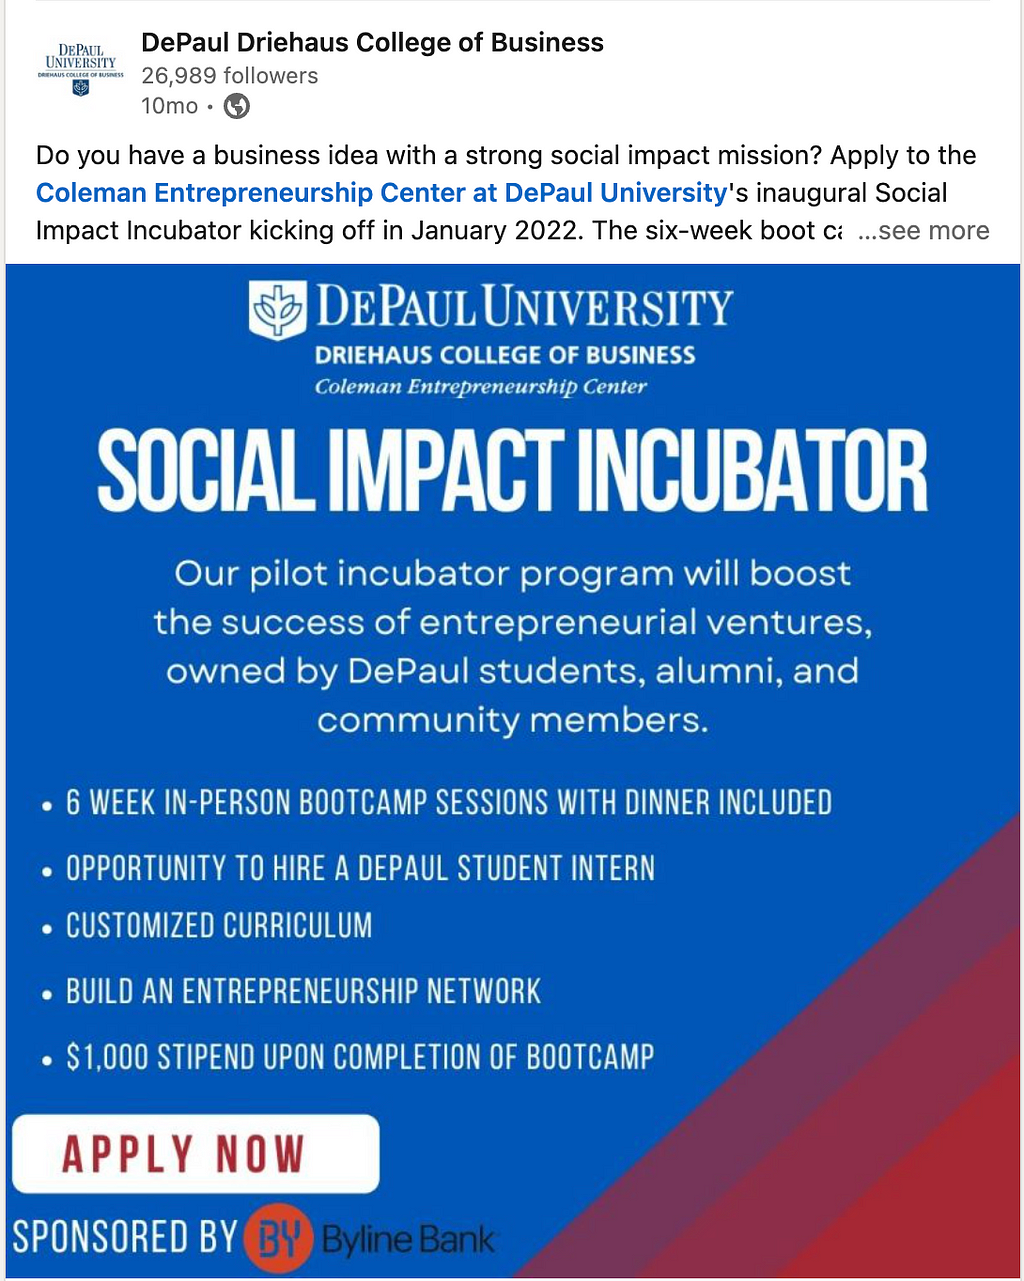 Post Caption: Do you have a business idea with a strong social impact mission? Apply to the Coleman Entrepreneurship Center at DePaul University’s inaugural Social Impact Incubator kicking off in January 2022. Blue Background with the following: SOCIAL IMPACT INCUBATOR: Our pilot incubator program will boost the success of entrepreneurial ventures, owned by DePaul students, alumni, and community members. -6-week in-peron bootcamp sessions with dinner included -Opportunity to hire a DePaul stude